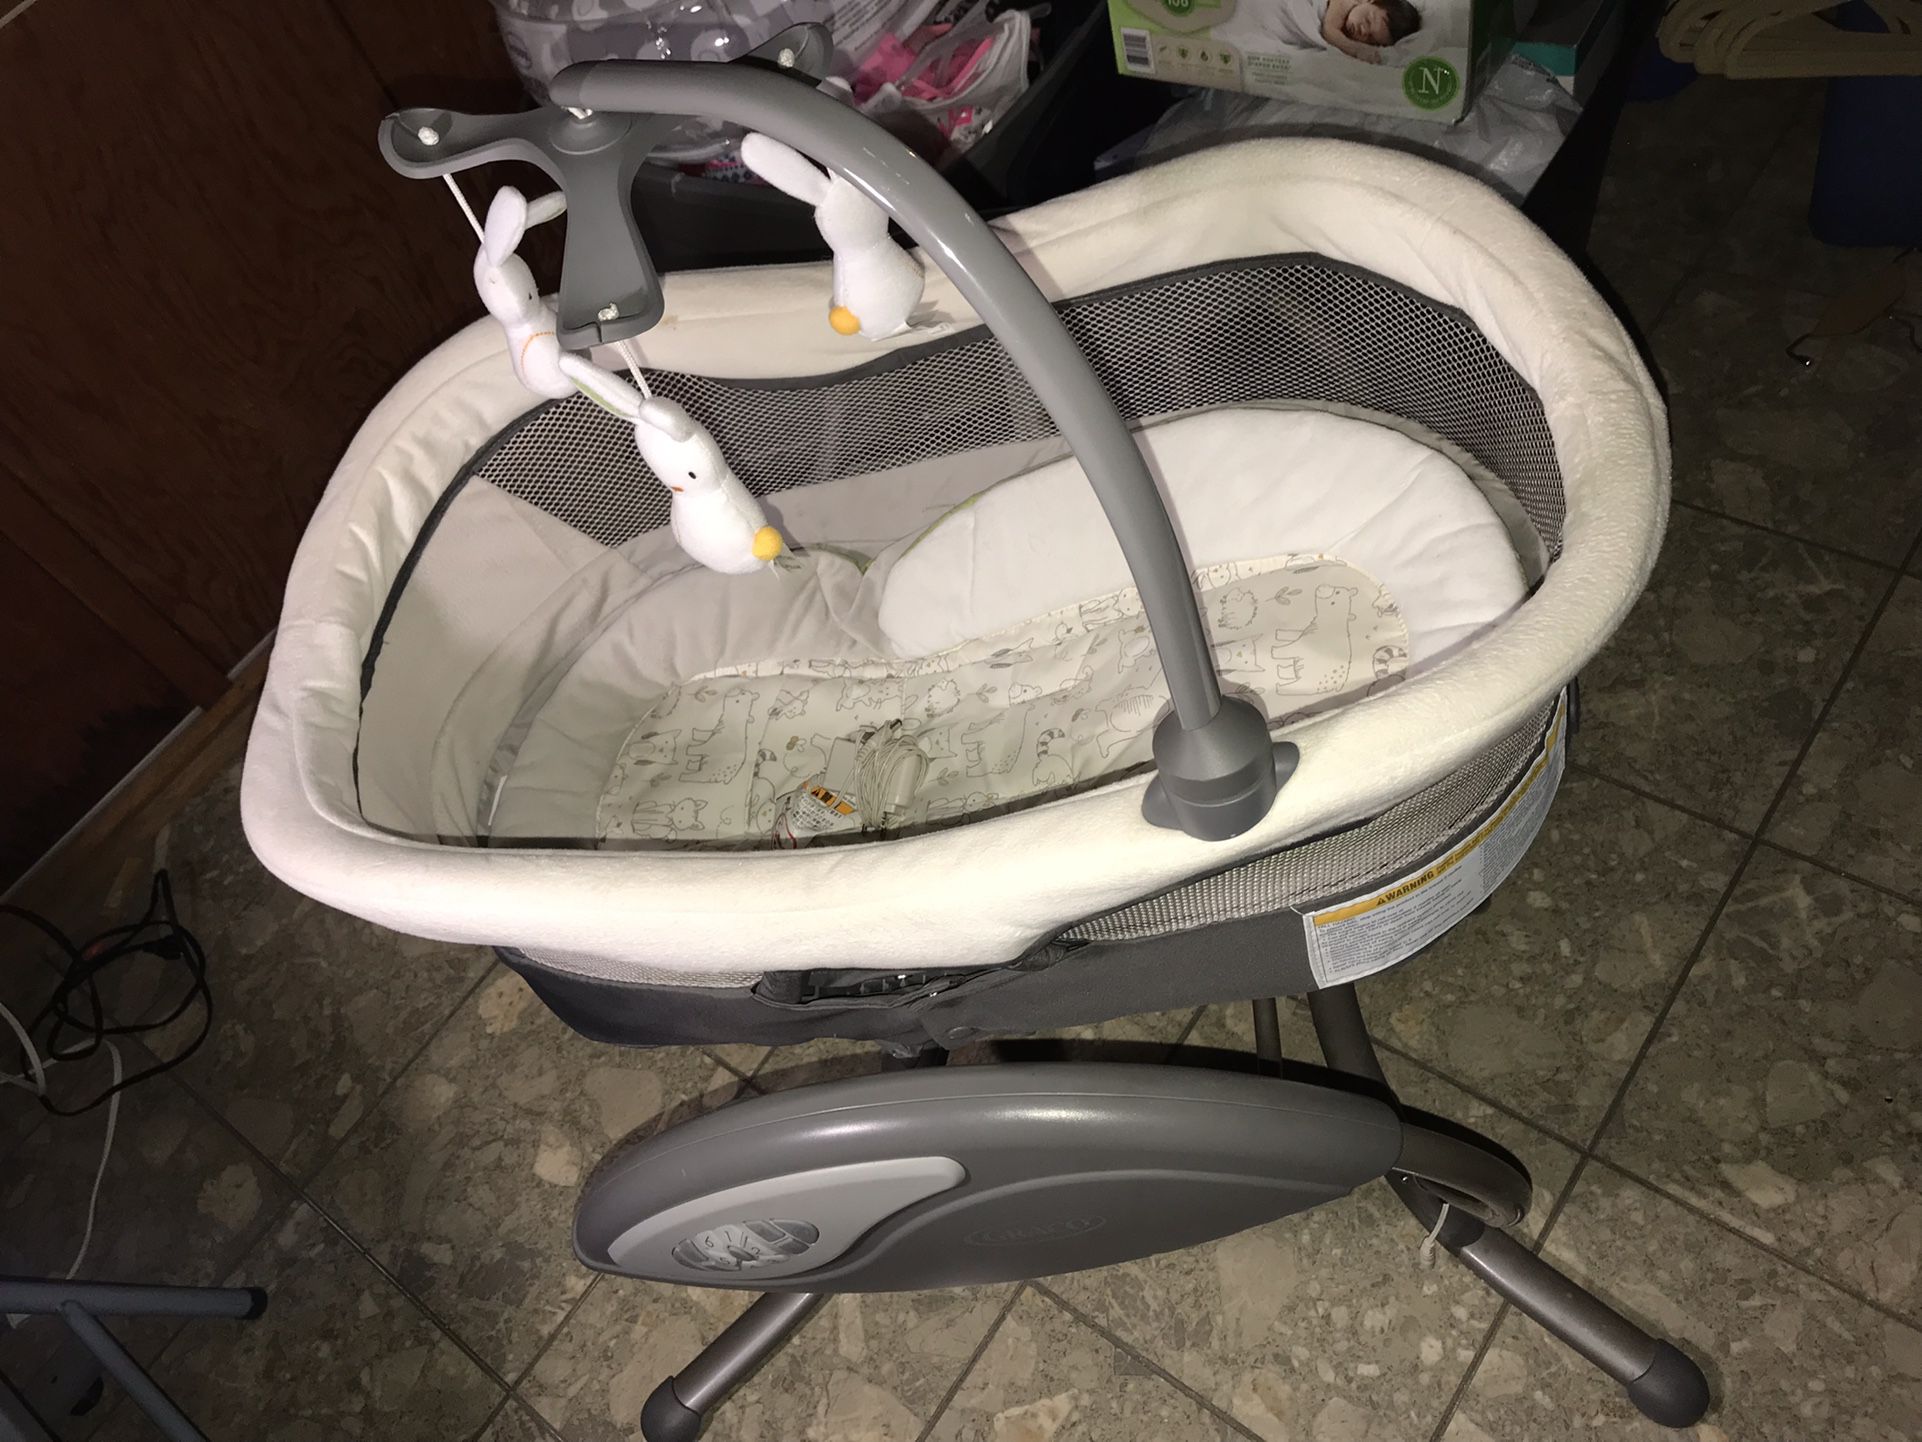 $100 Or b/O Graco  Cradle That Swings, Vibrates & Has A Noise Machine On It 